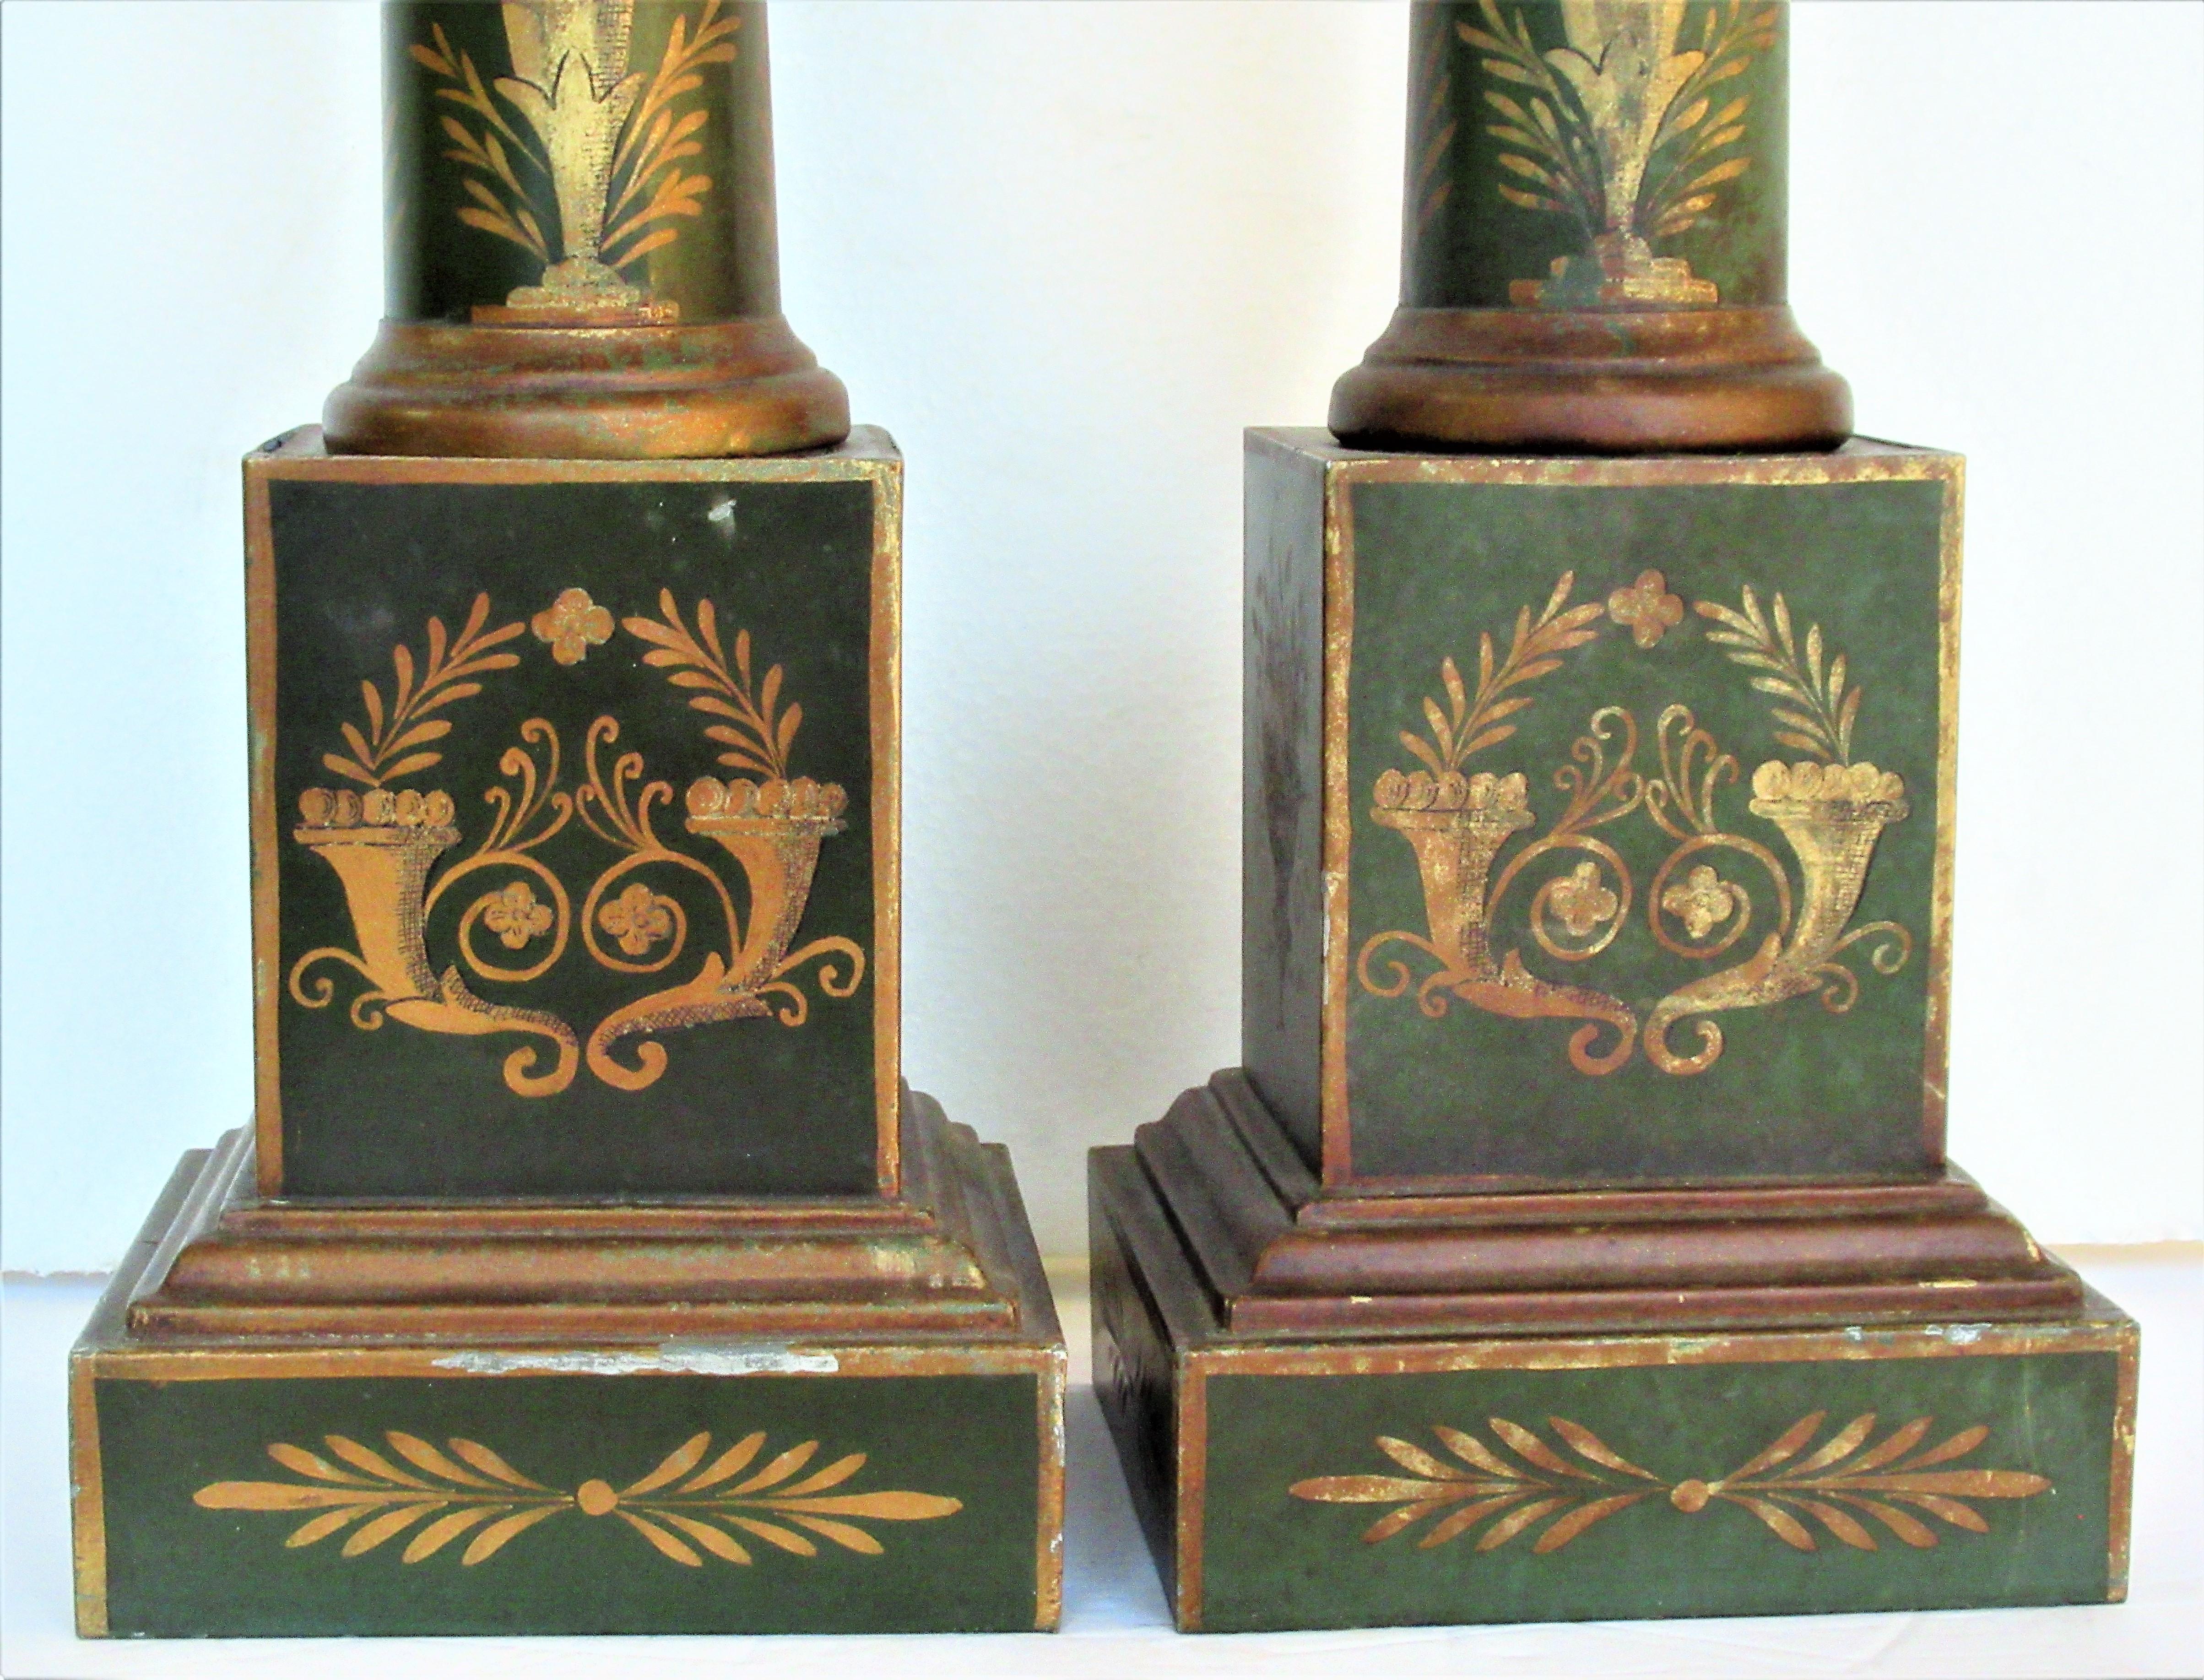 Classical French Empire style tole painted tin metal column table lamps with finely detailed gilded decoration of wreaths, baskets, cornucopia, snake handled urns, more. Great looking old lamps in overall beautifully aged original old surface color,